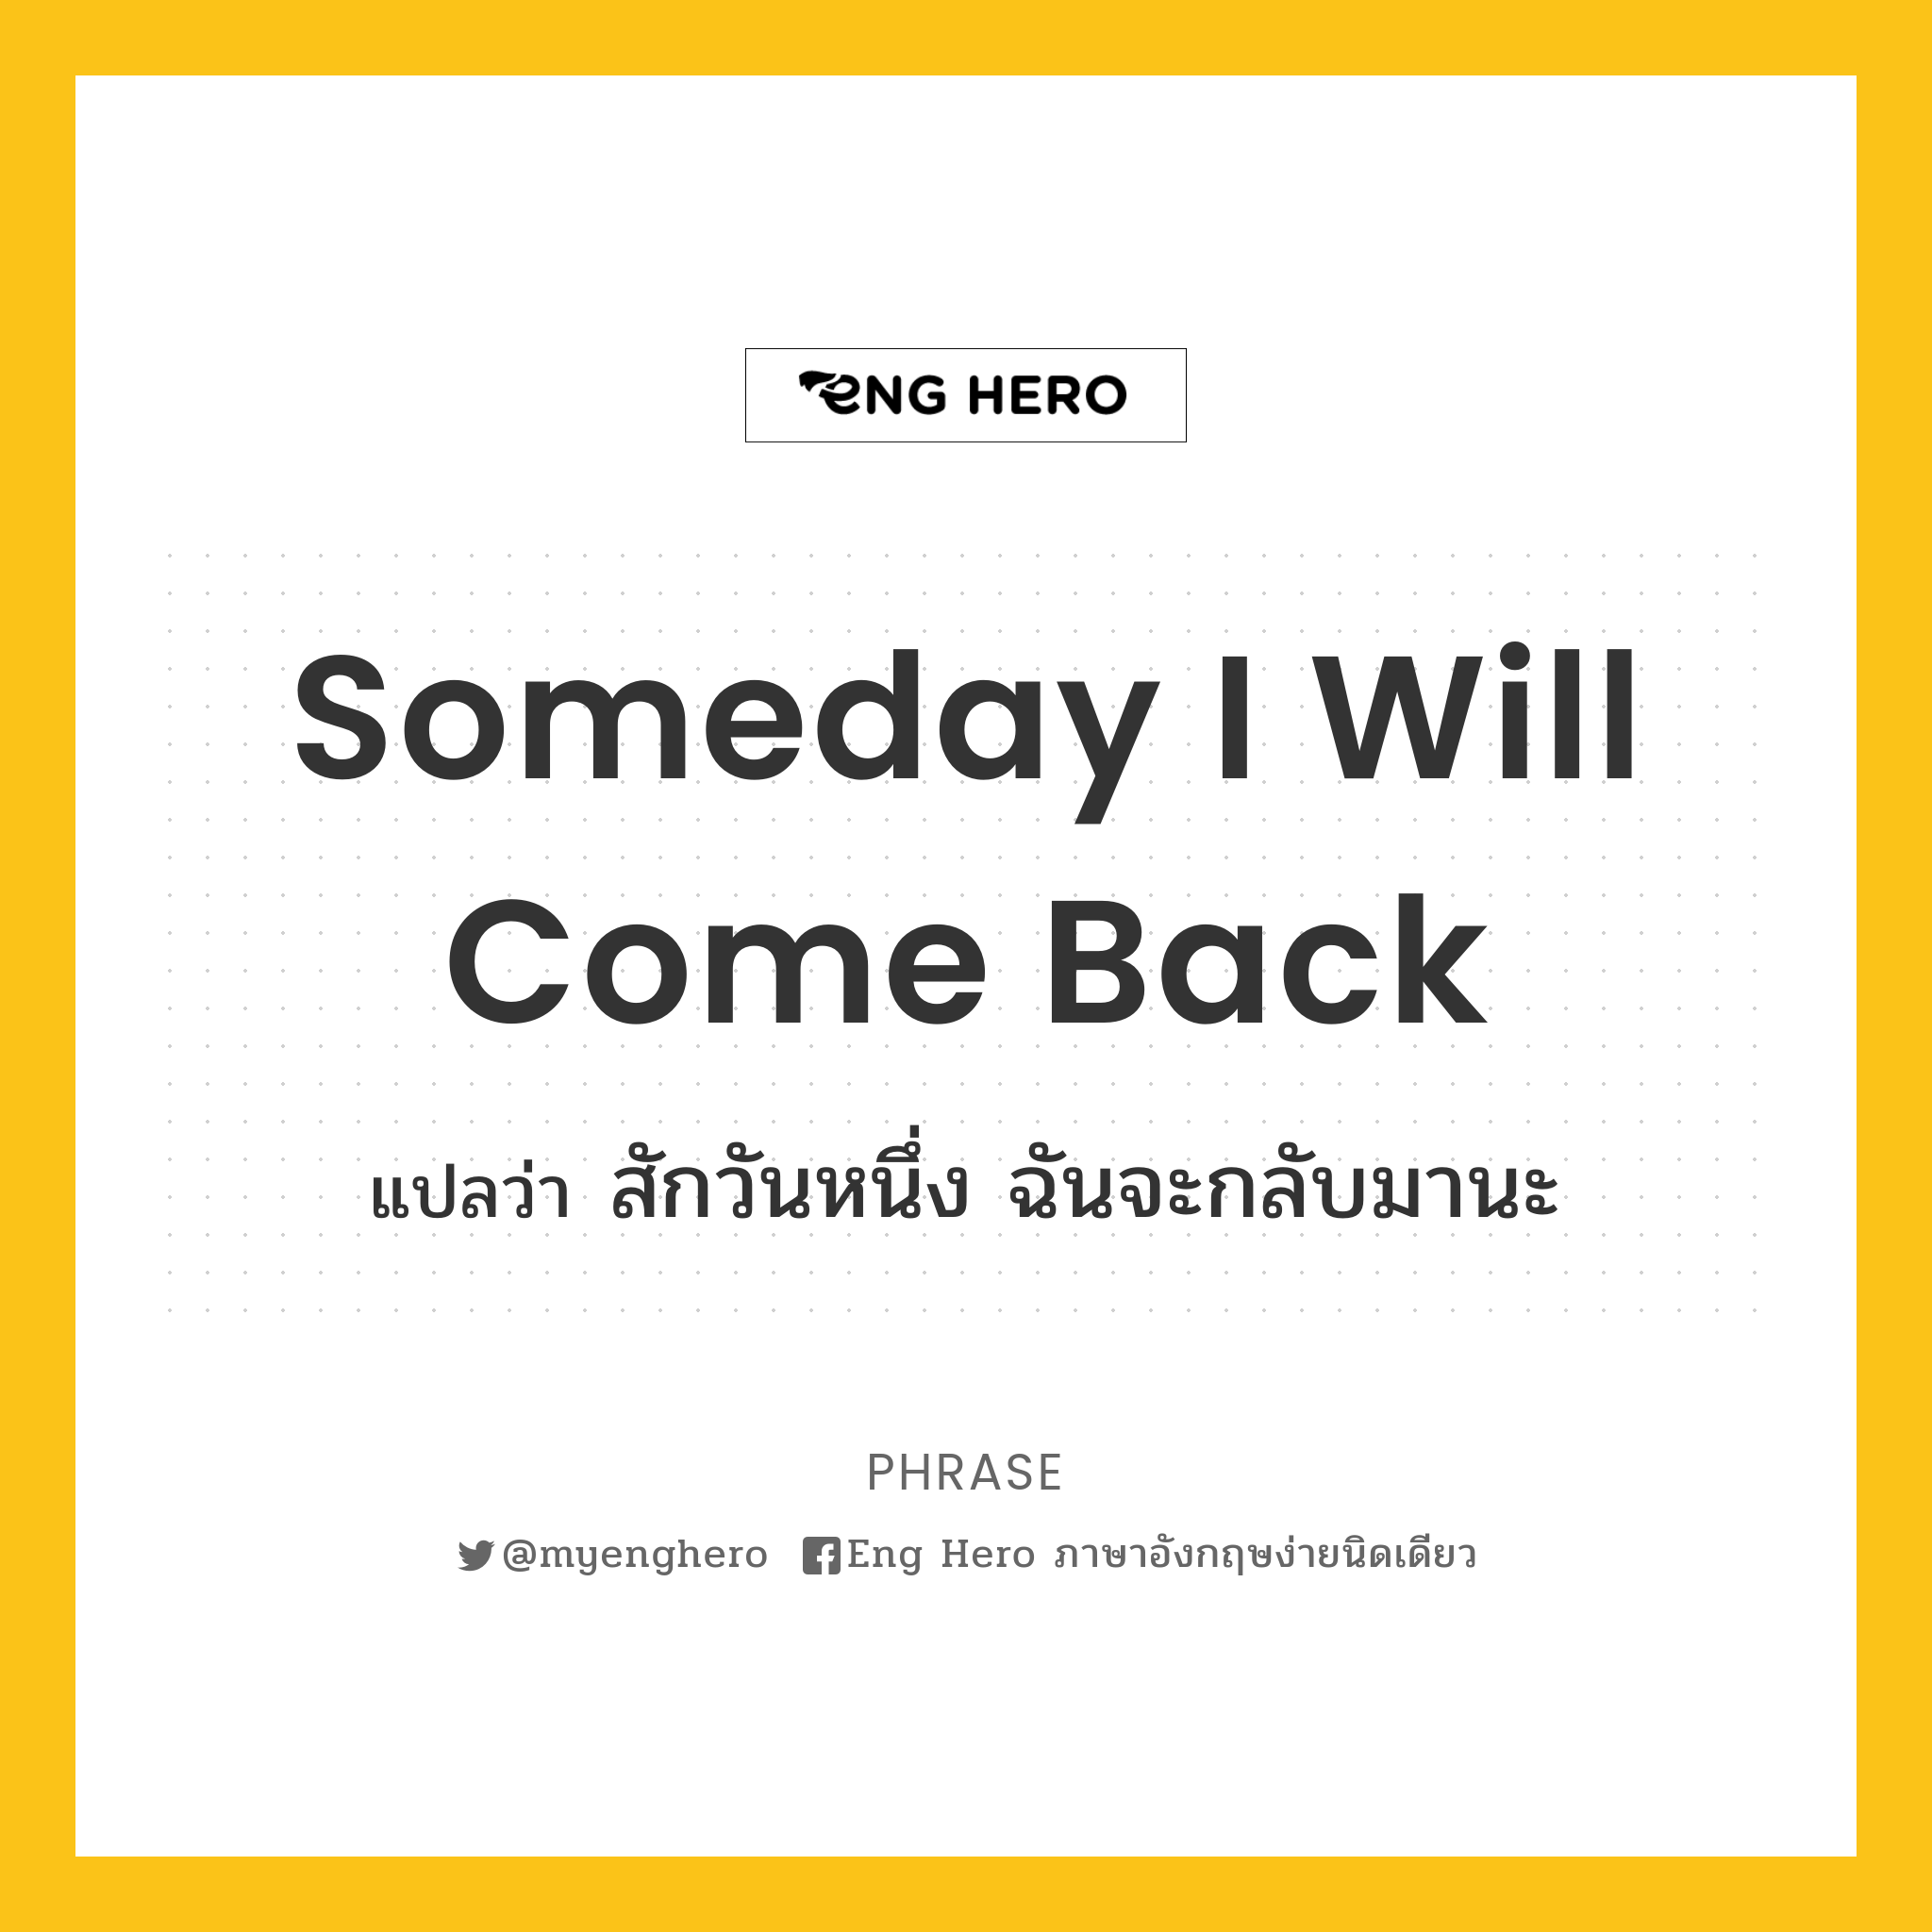 Someday I will come back